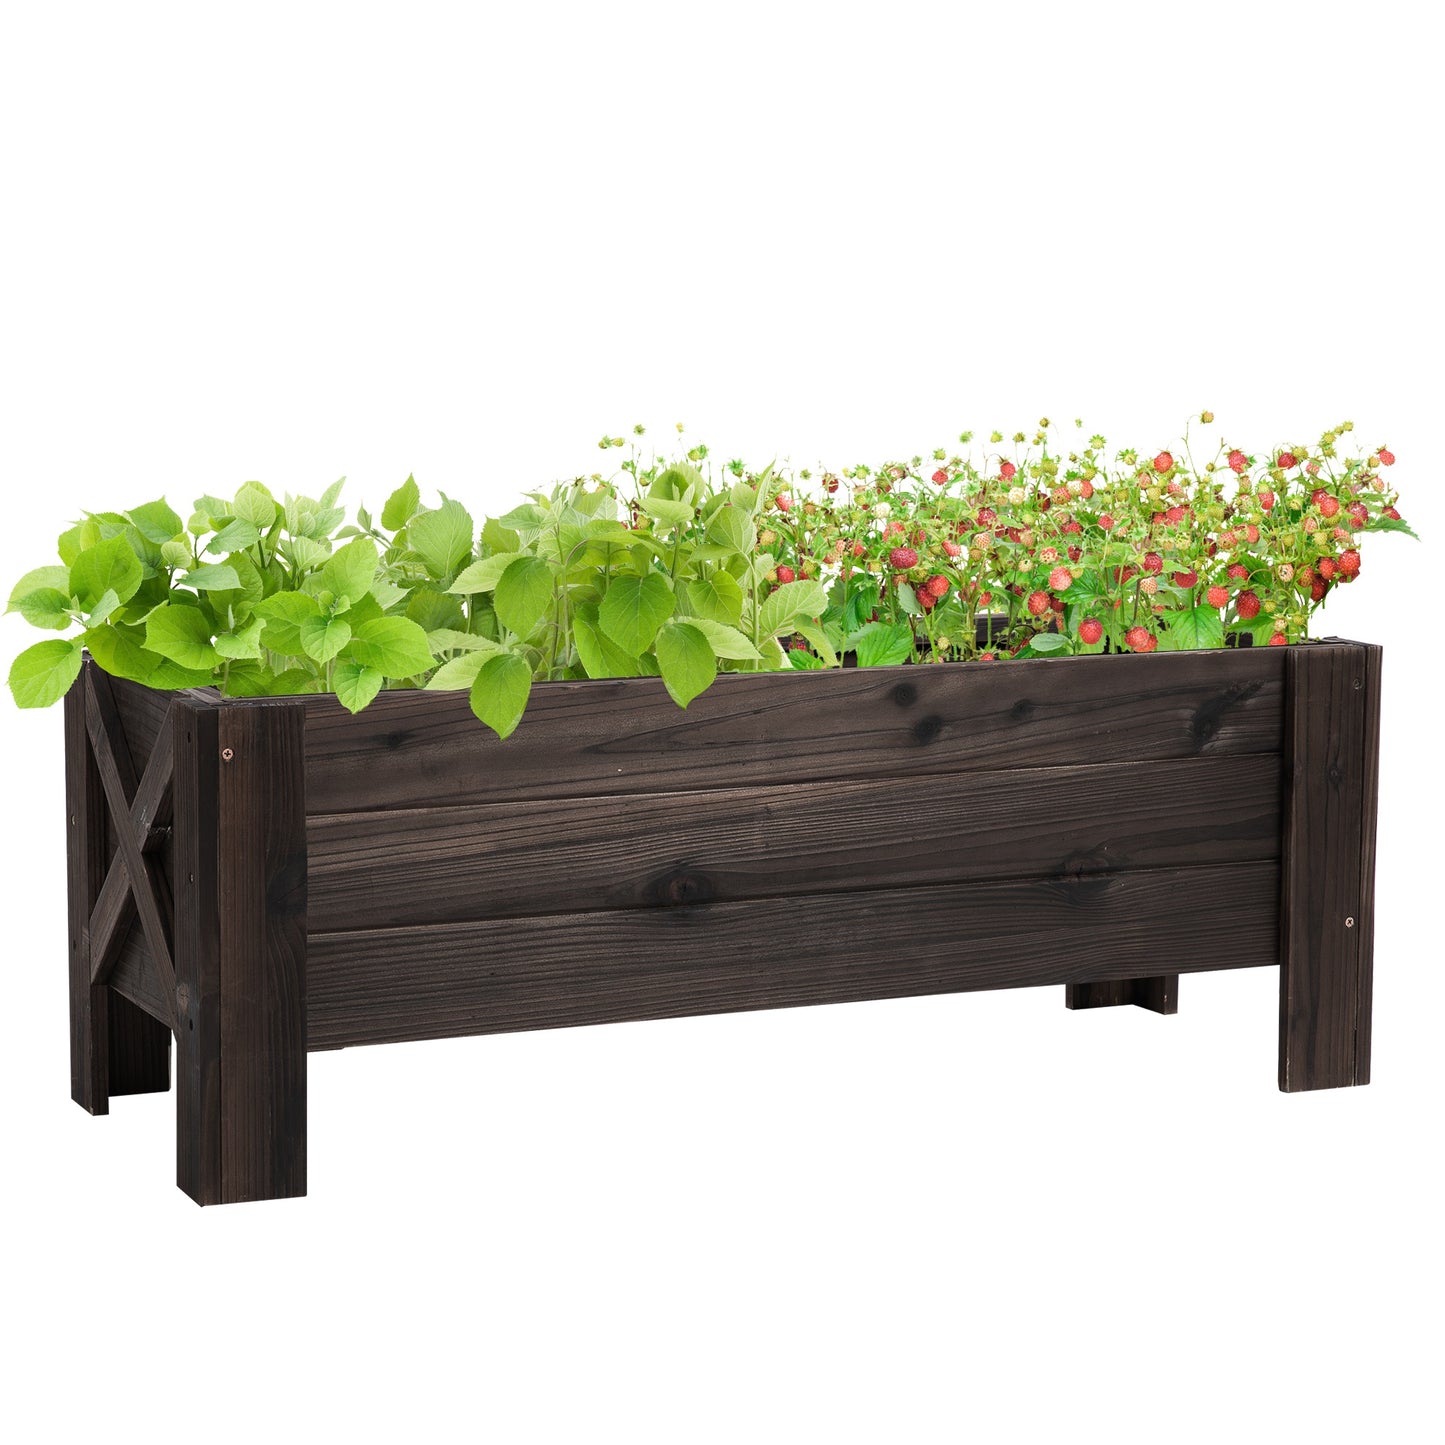 Outsunny Wooden Garden Raised Bed Planter Grow Containers Patio Flower Vegetable Pot